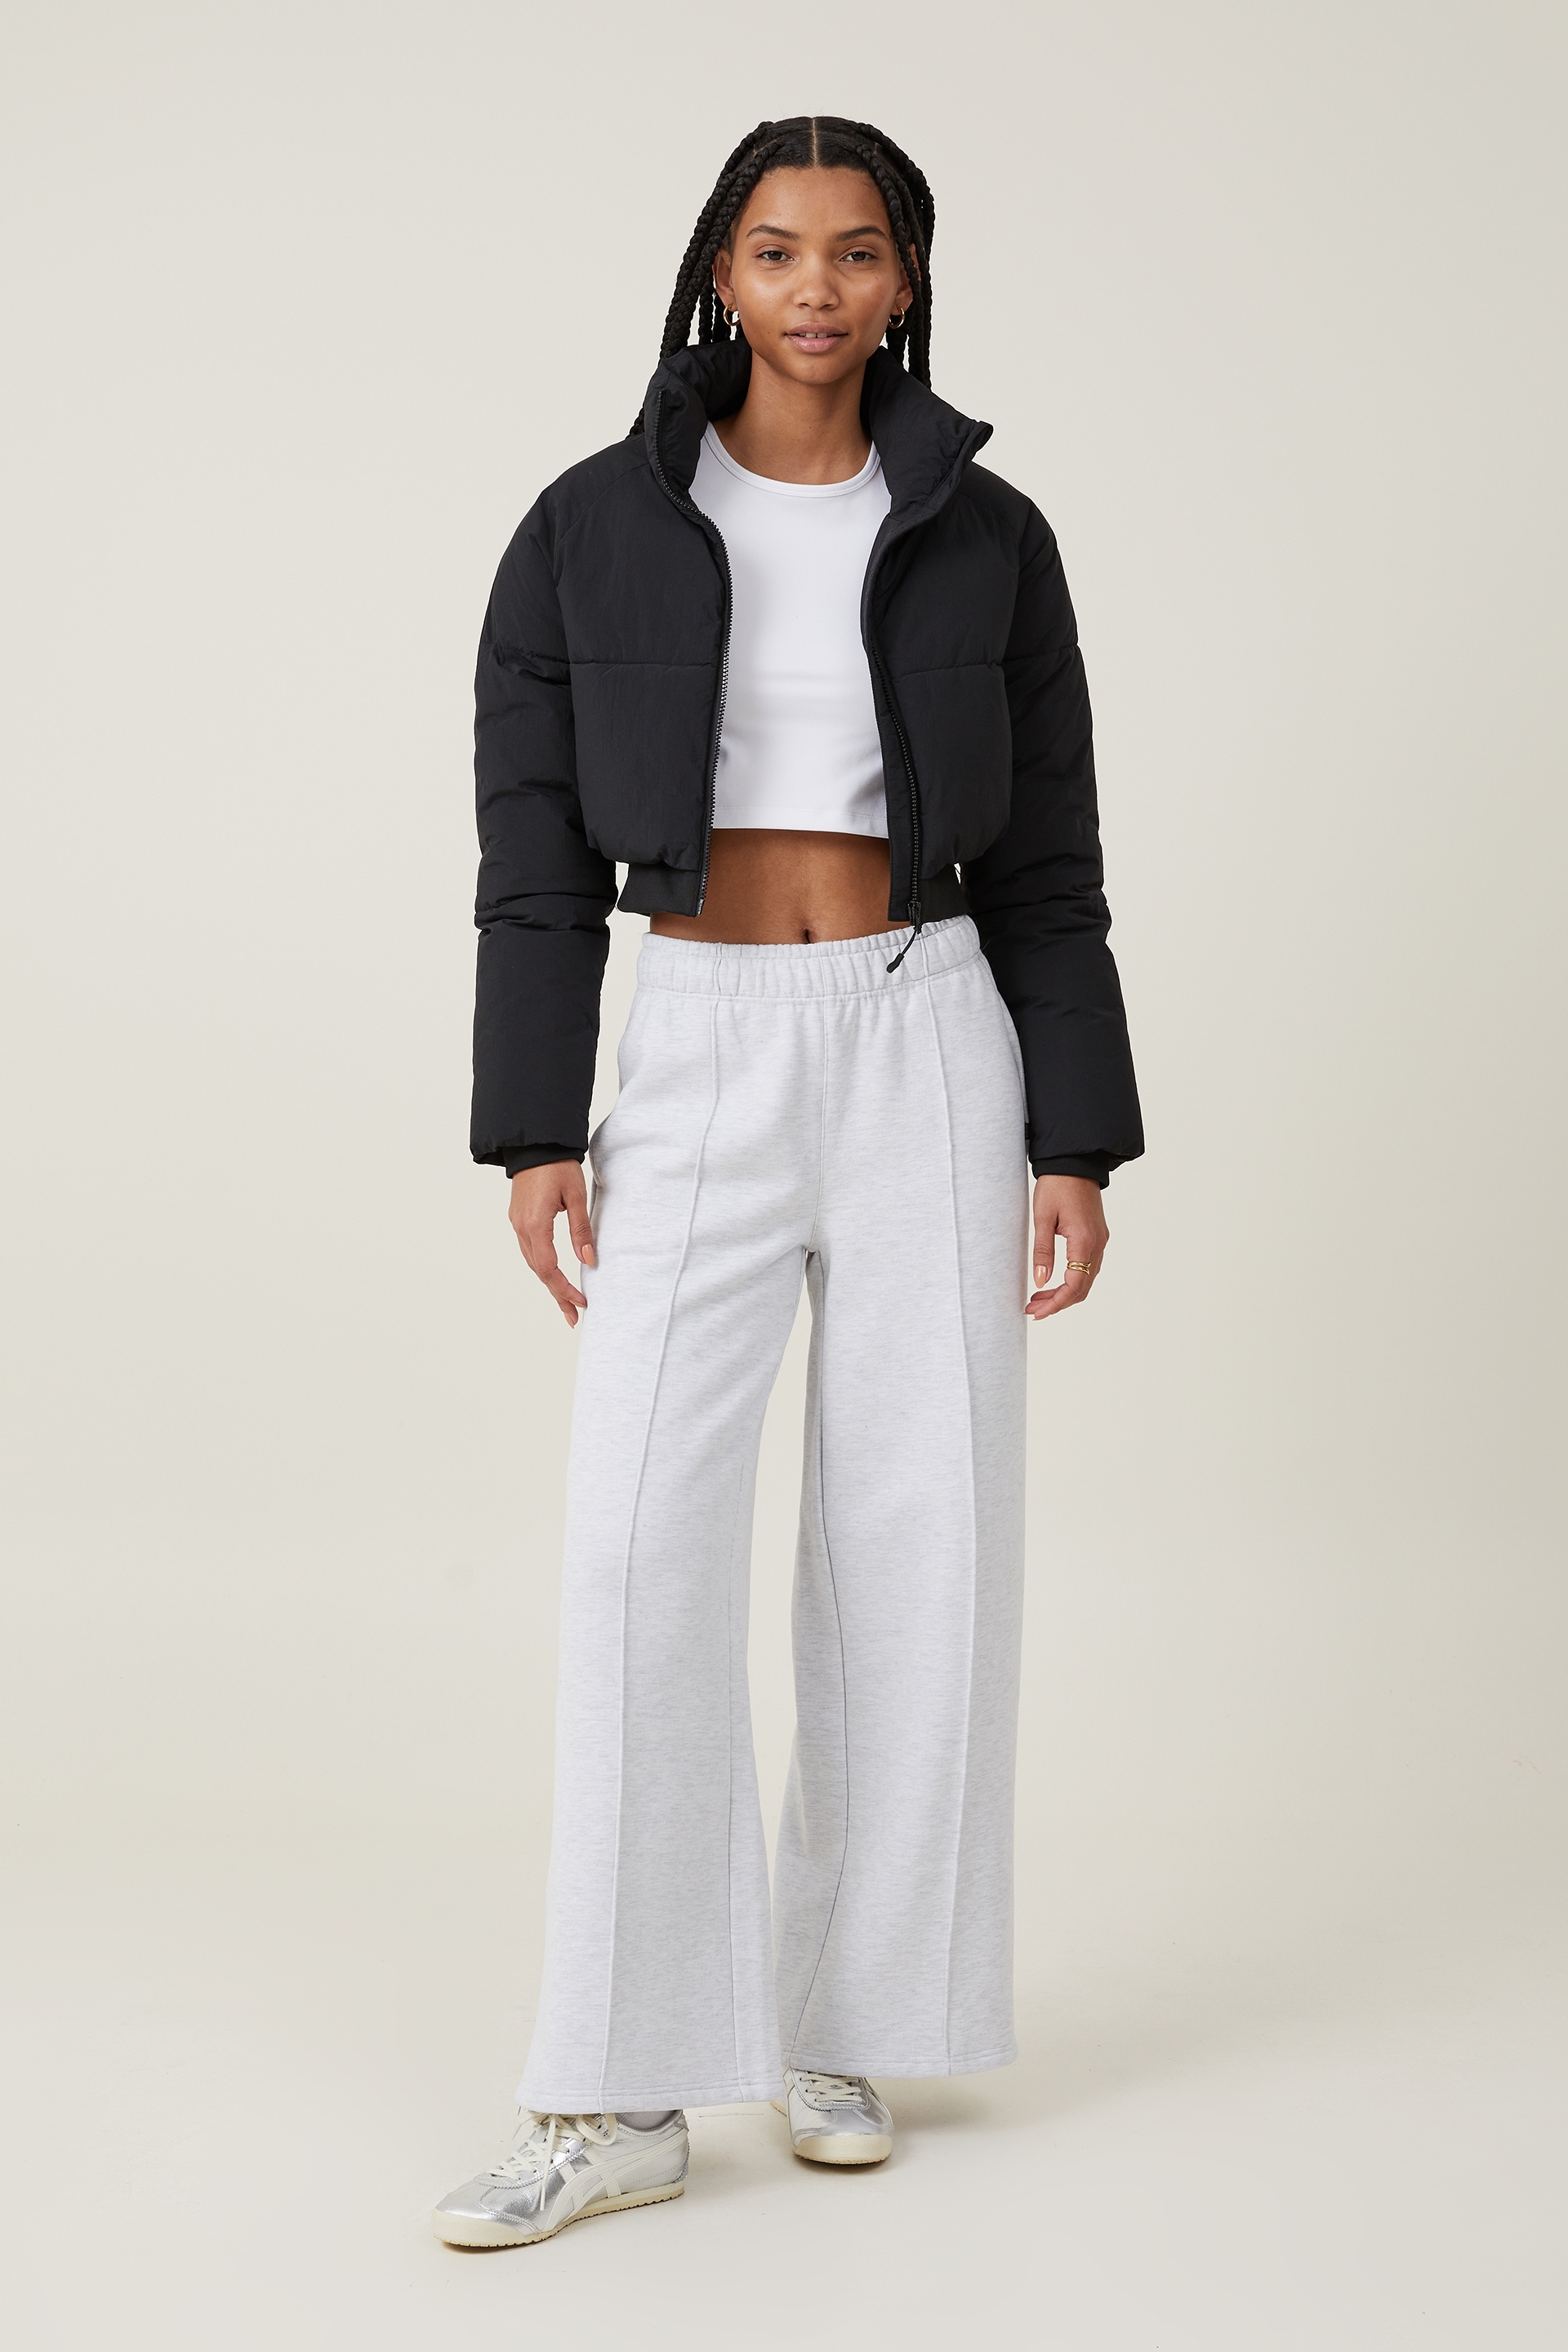 Body - The Recycled Cropped Mother Puffer 2.0 - Black